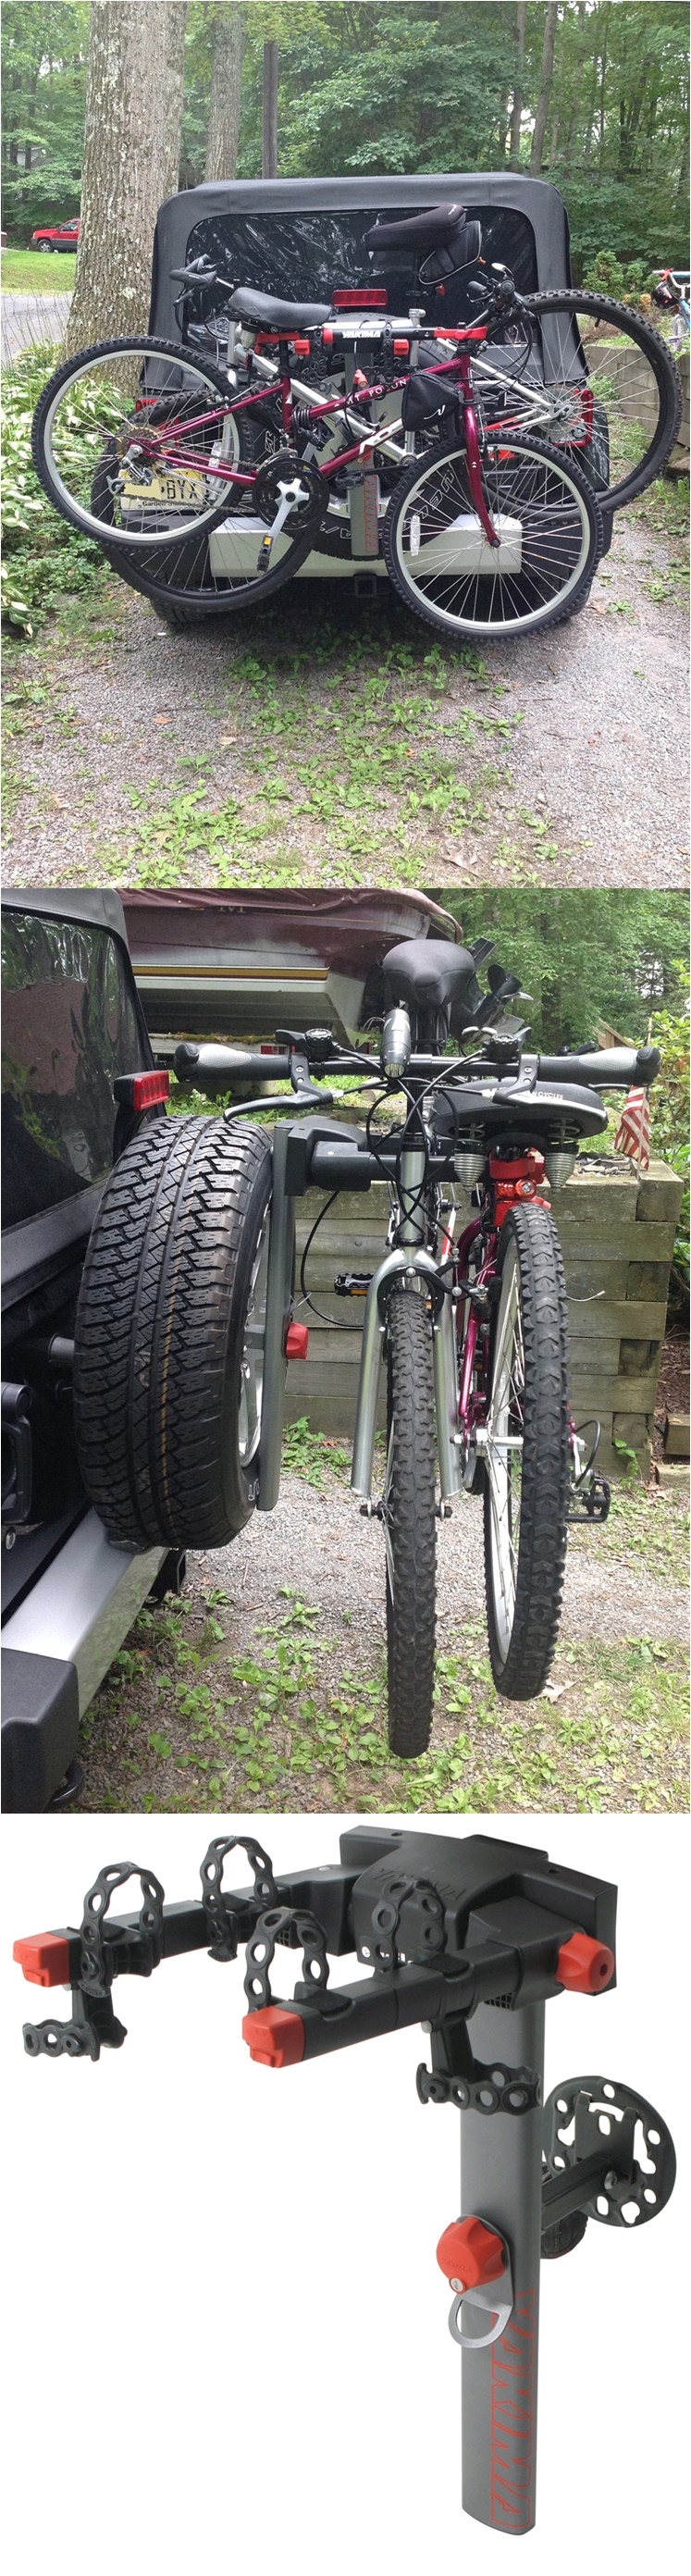 securely mount this bike rack to the spare tire of the jeep wrangler transport 2 bikes to your biking destination with maximum bike protection and